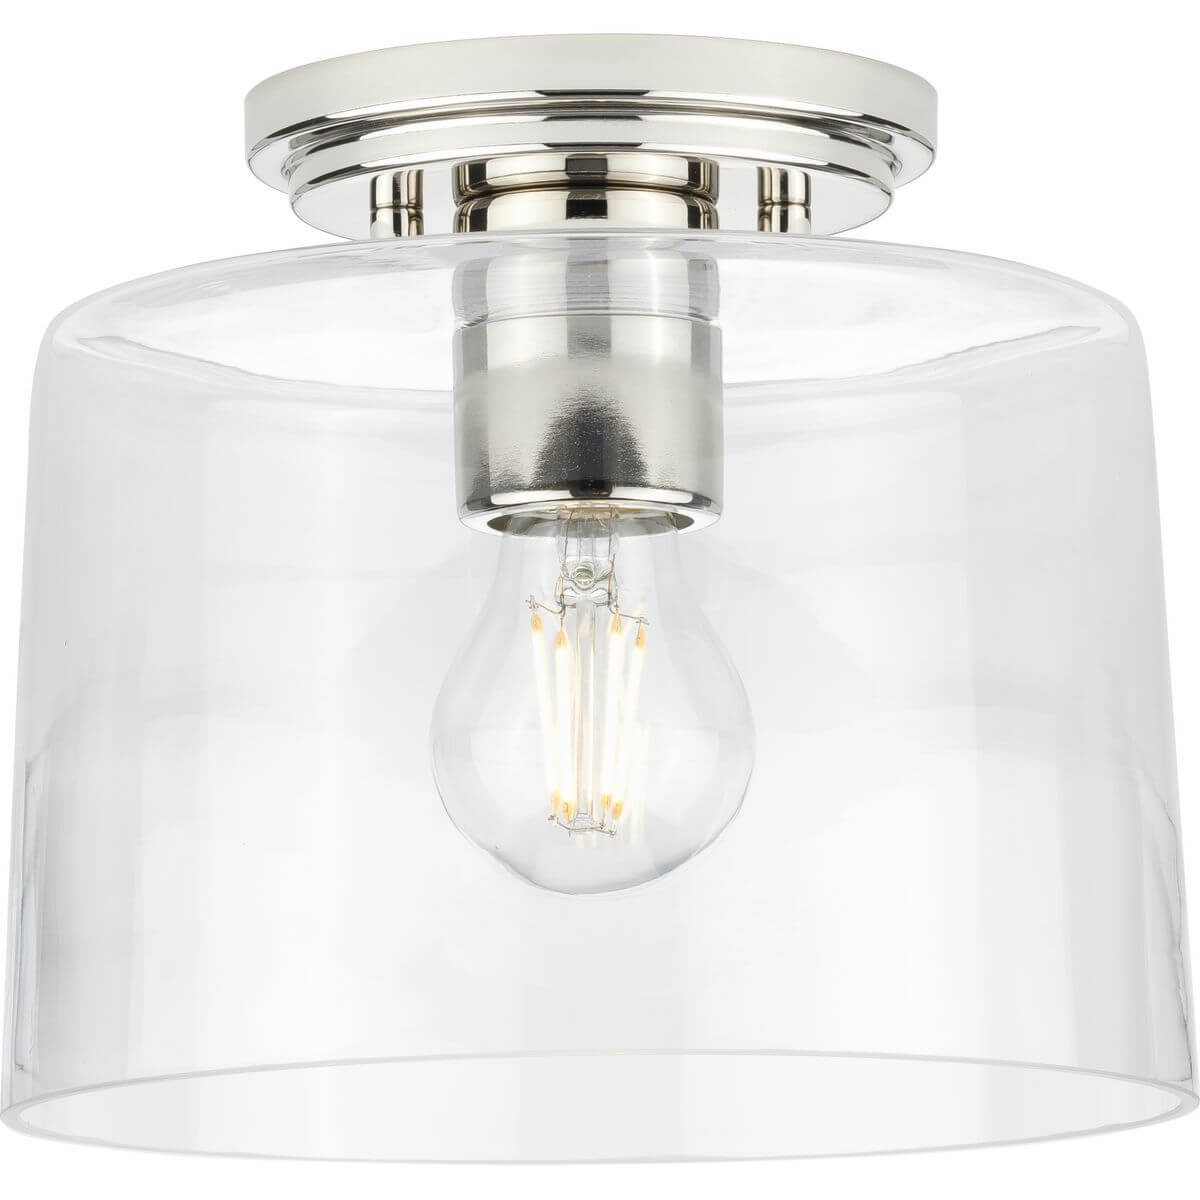 Progress Lighting Adley 1 Light 9 inch Flush Mount in Polished Nickel with Clear Glass P350213-104